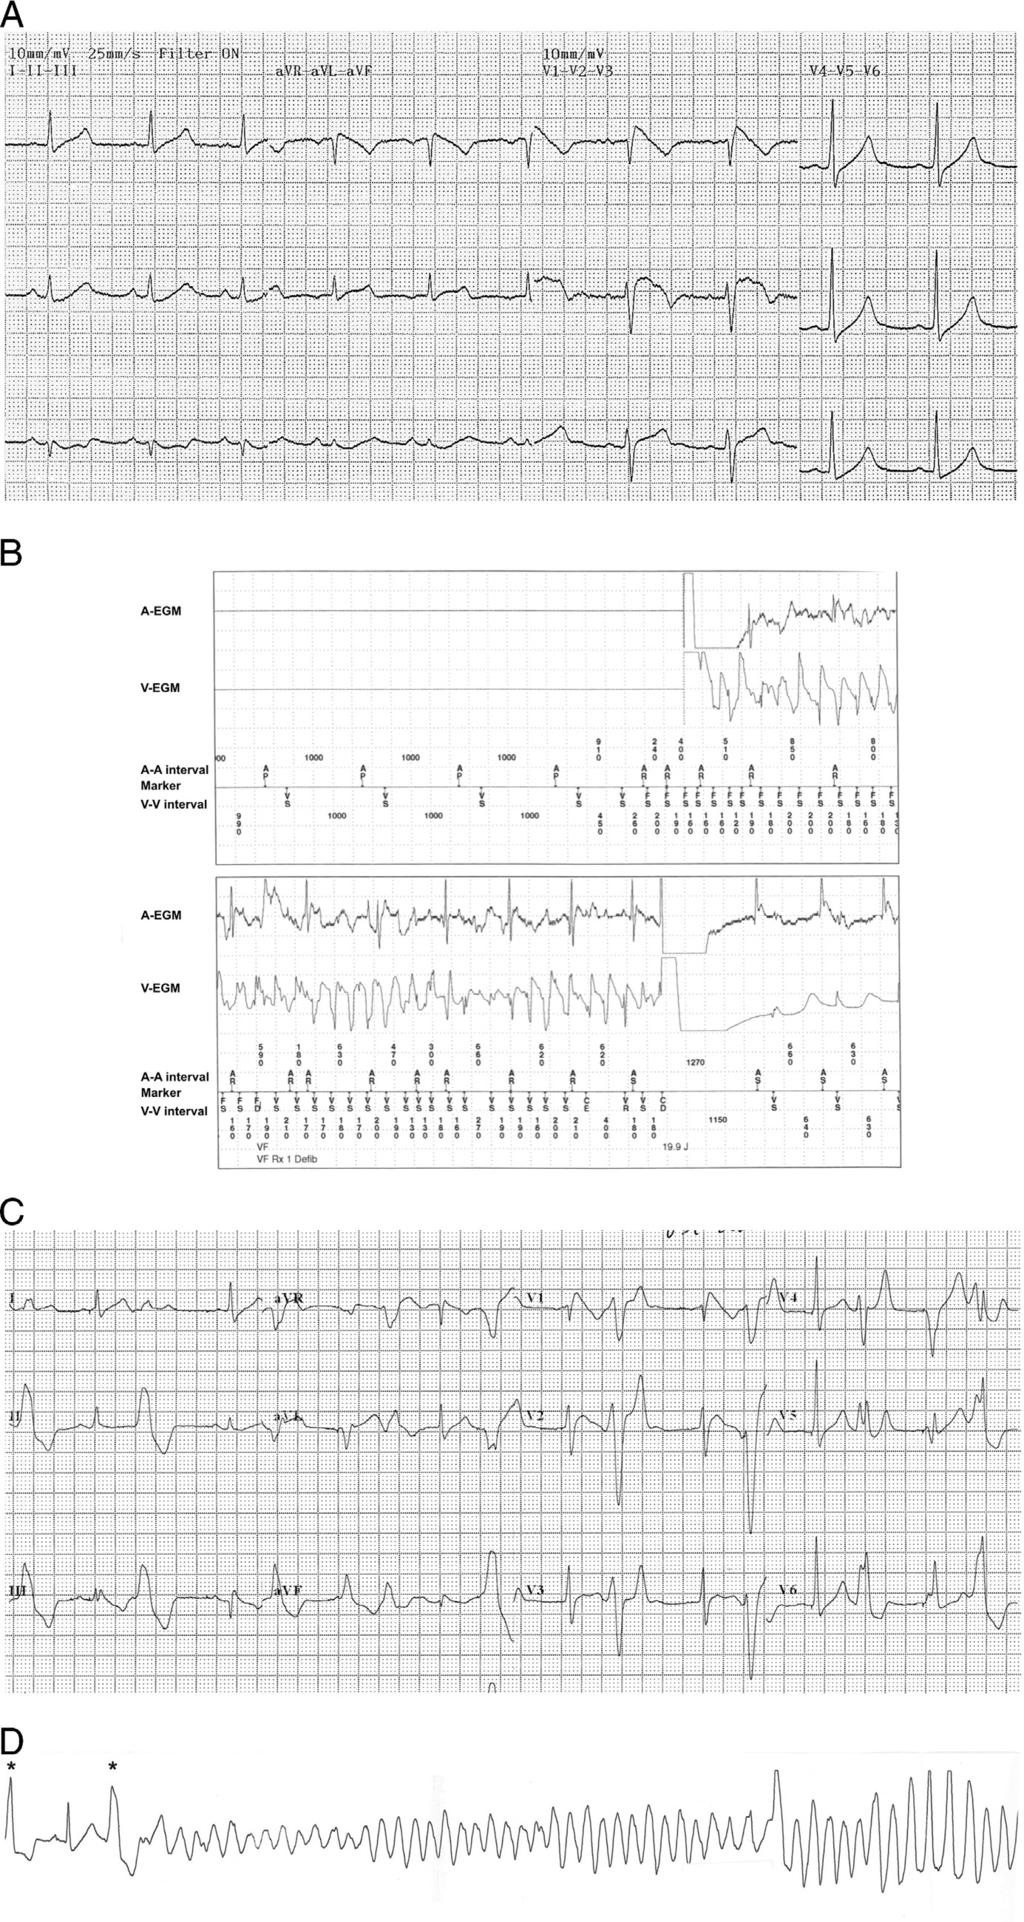 488 Heart Rhythm Case Reports, Vol 2, No 6, November 2016 Figure 1 A: Standard 12-lead electrocardiogram (ECG) showing partial right bundle branch block with a coved ST-segment elevation and negative